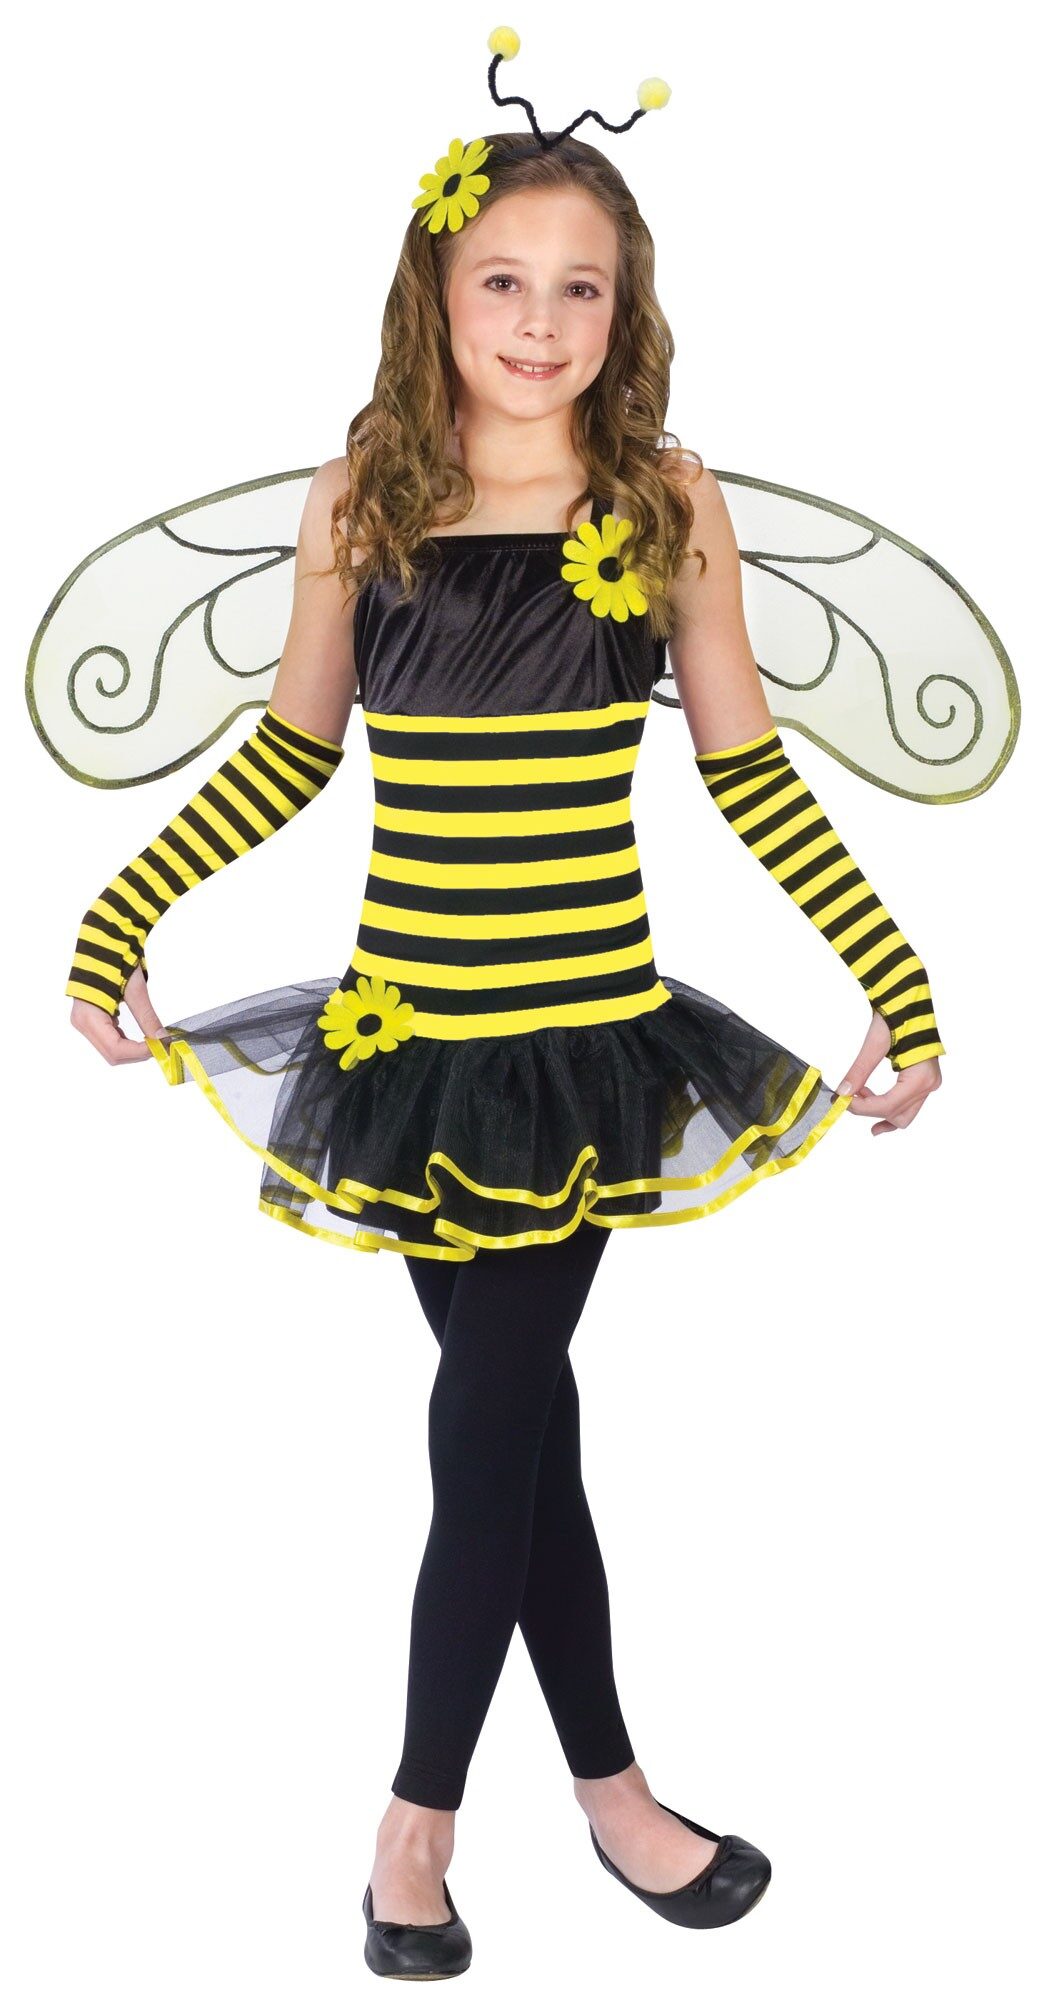 Bumble Bee Costumes. 